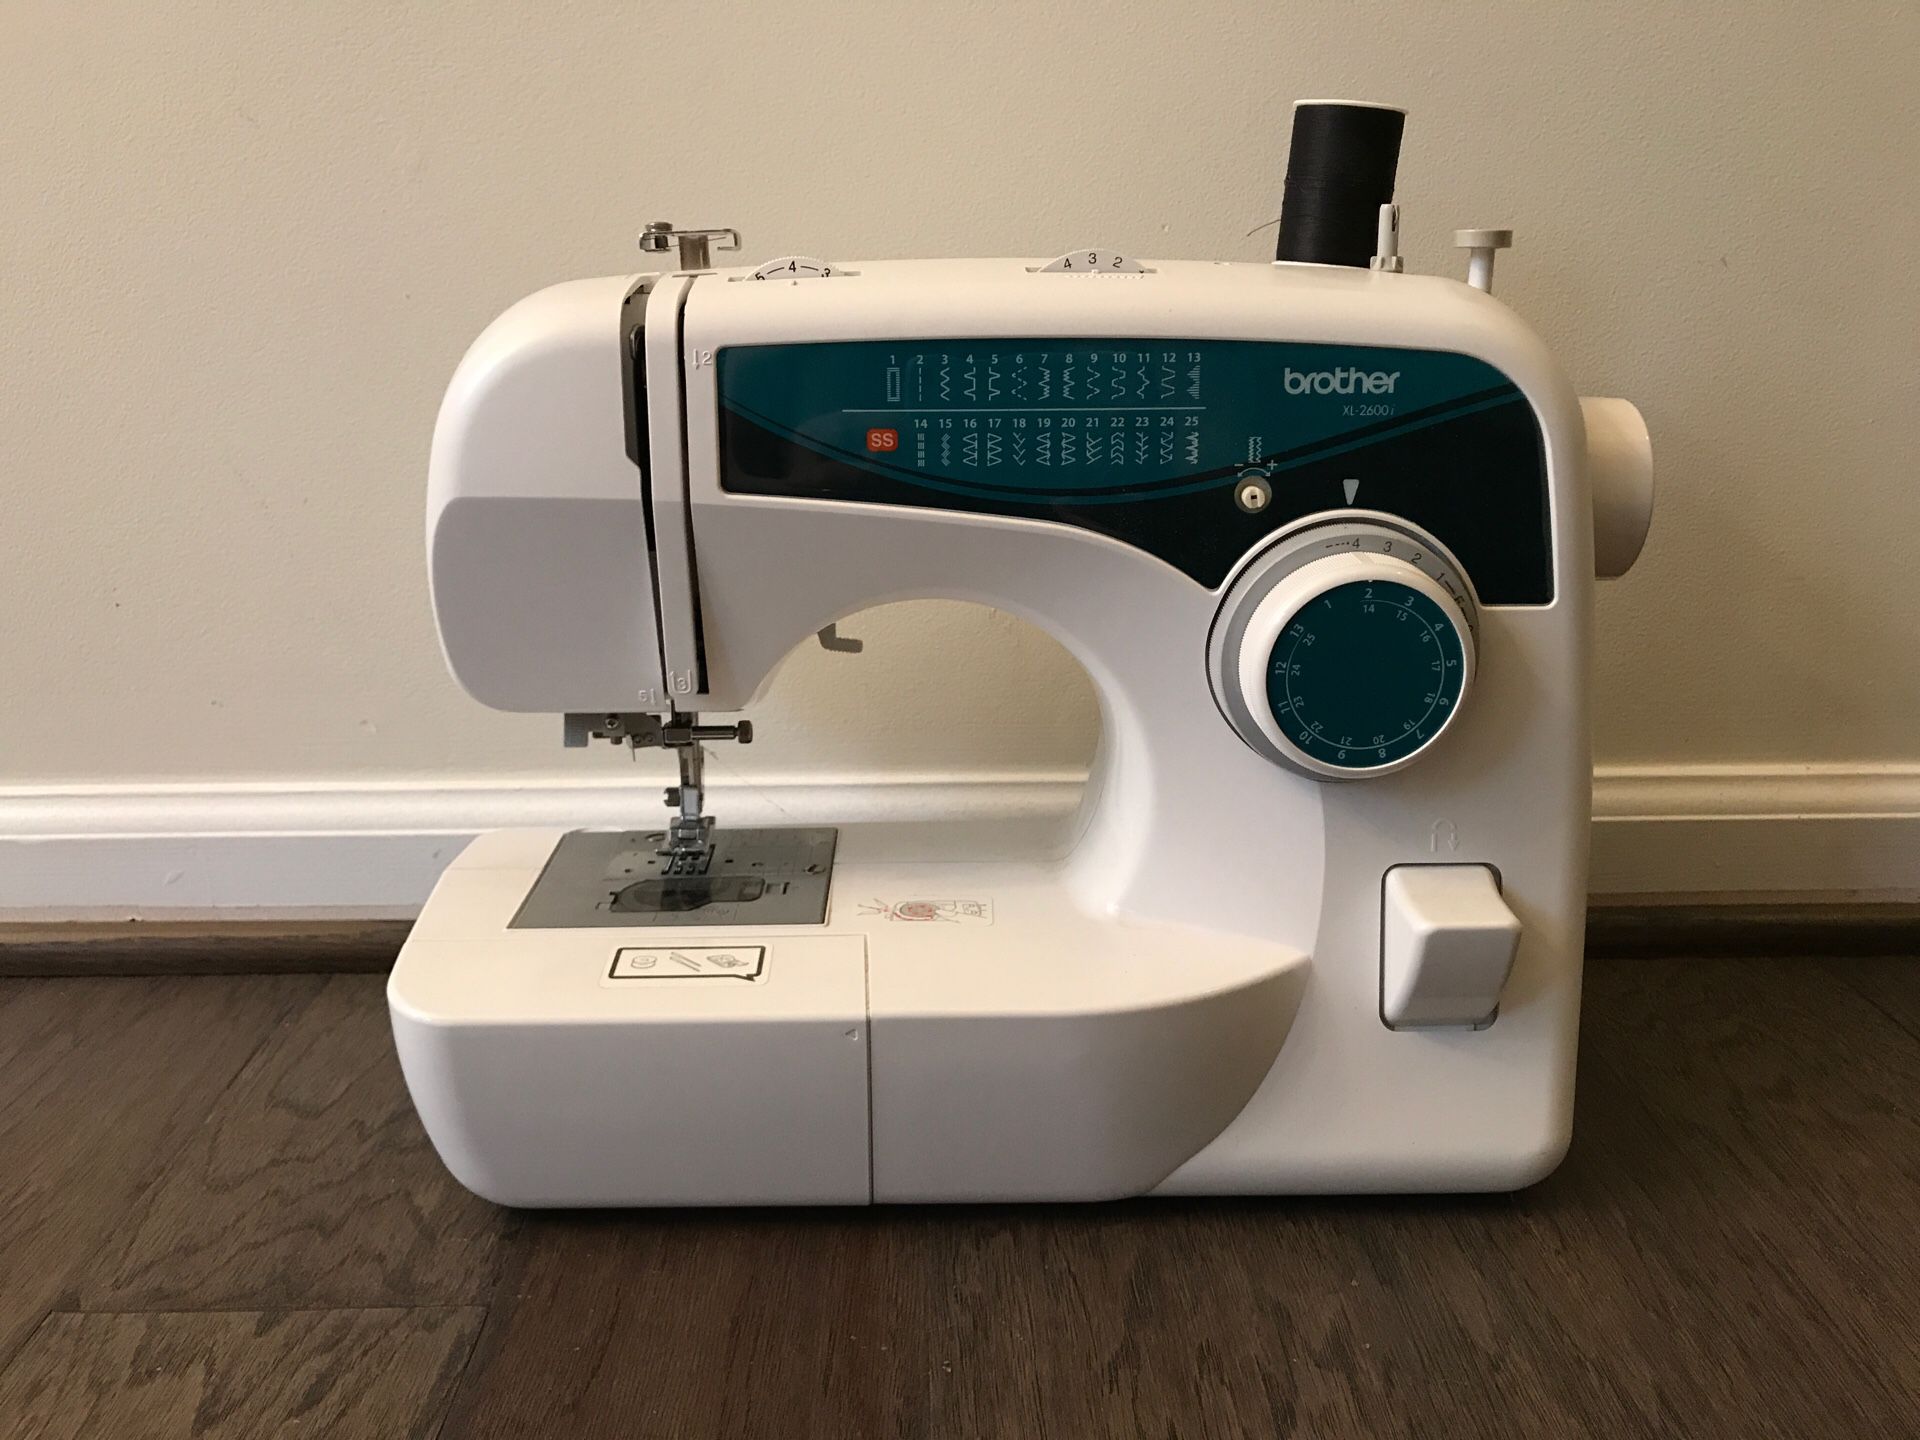 Brother XL2600i sewing machine